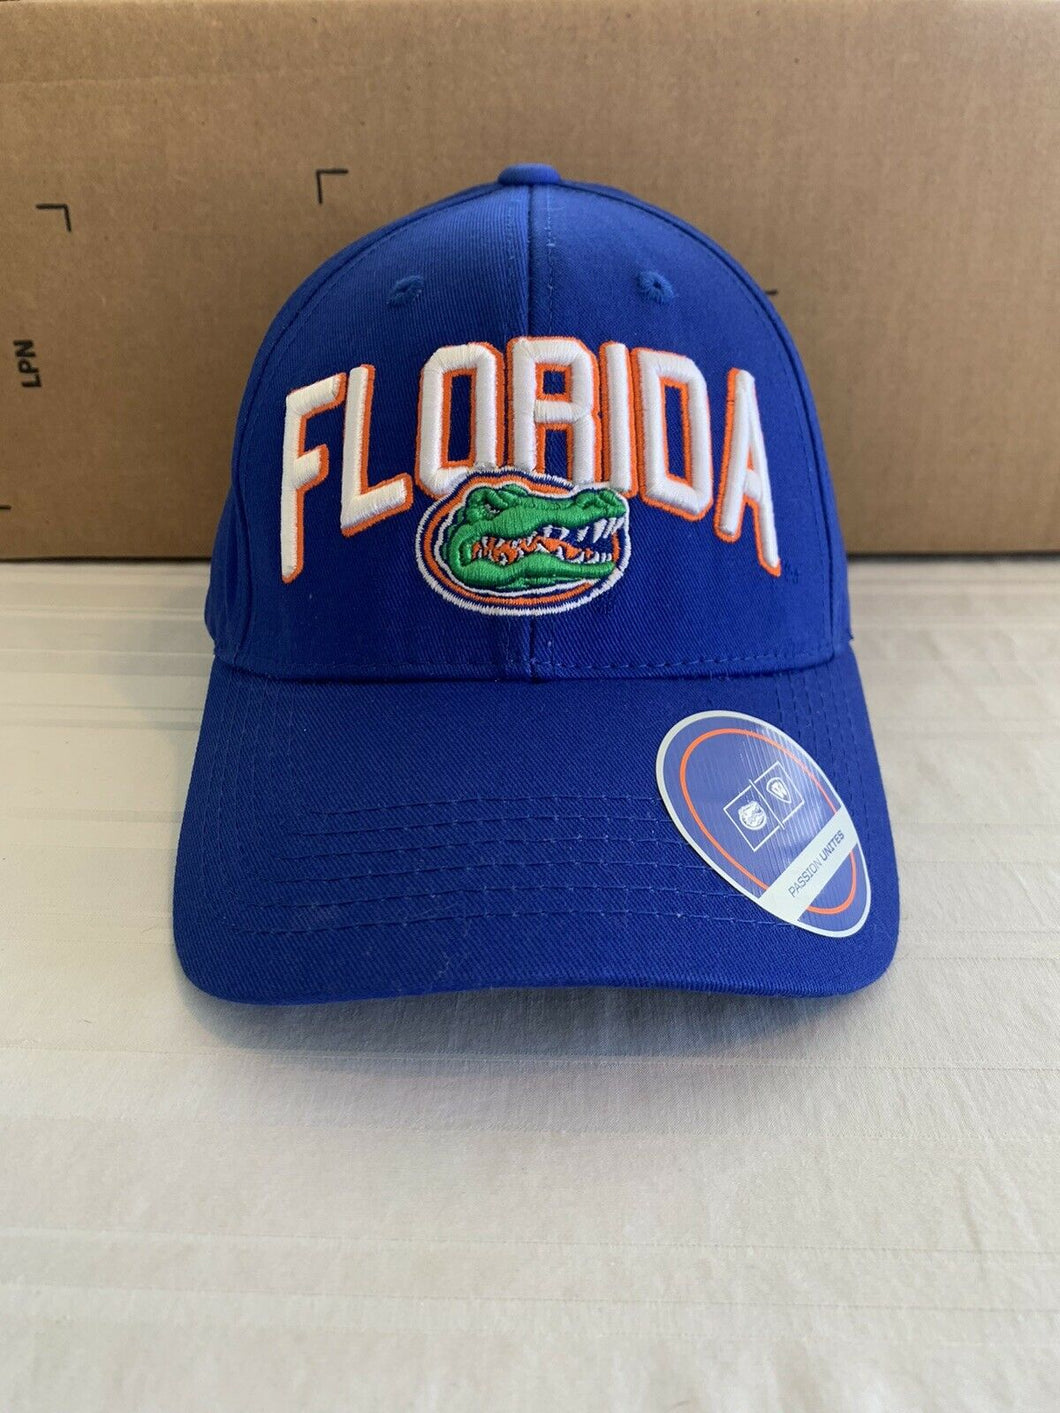 Florida Gators NCAA Top of the World Blue Adjustable One Size Snapback Hat - Casey's Sports Store